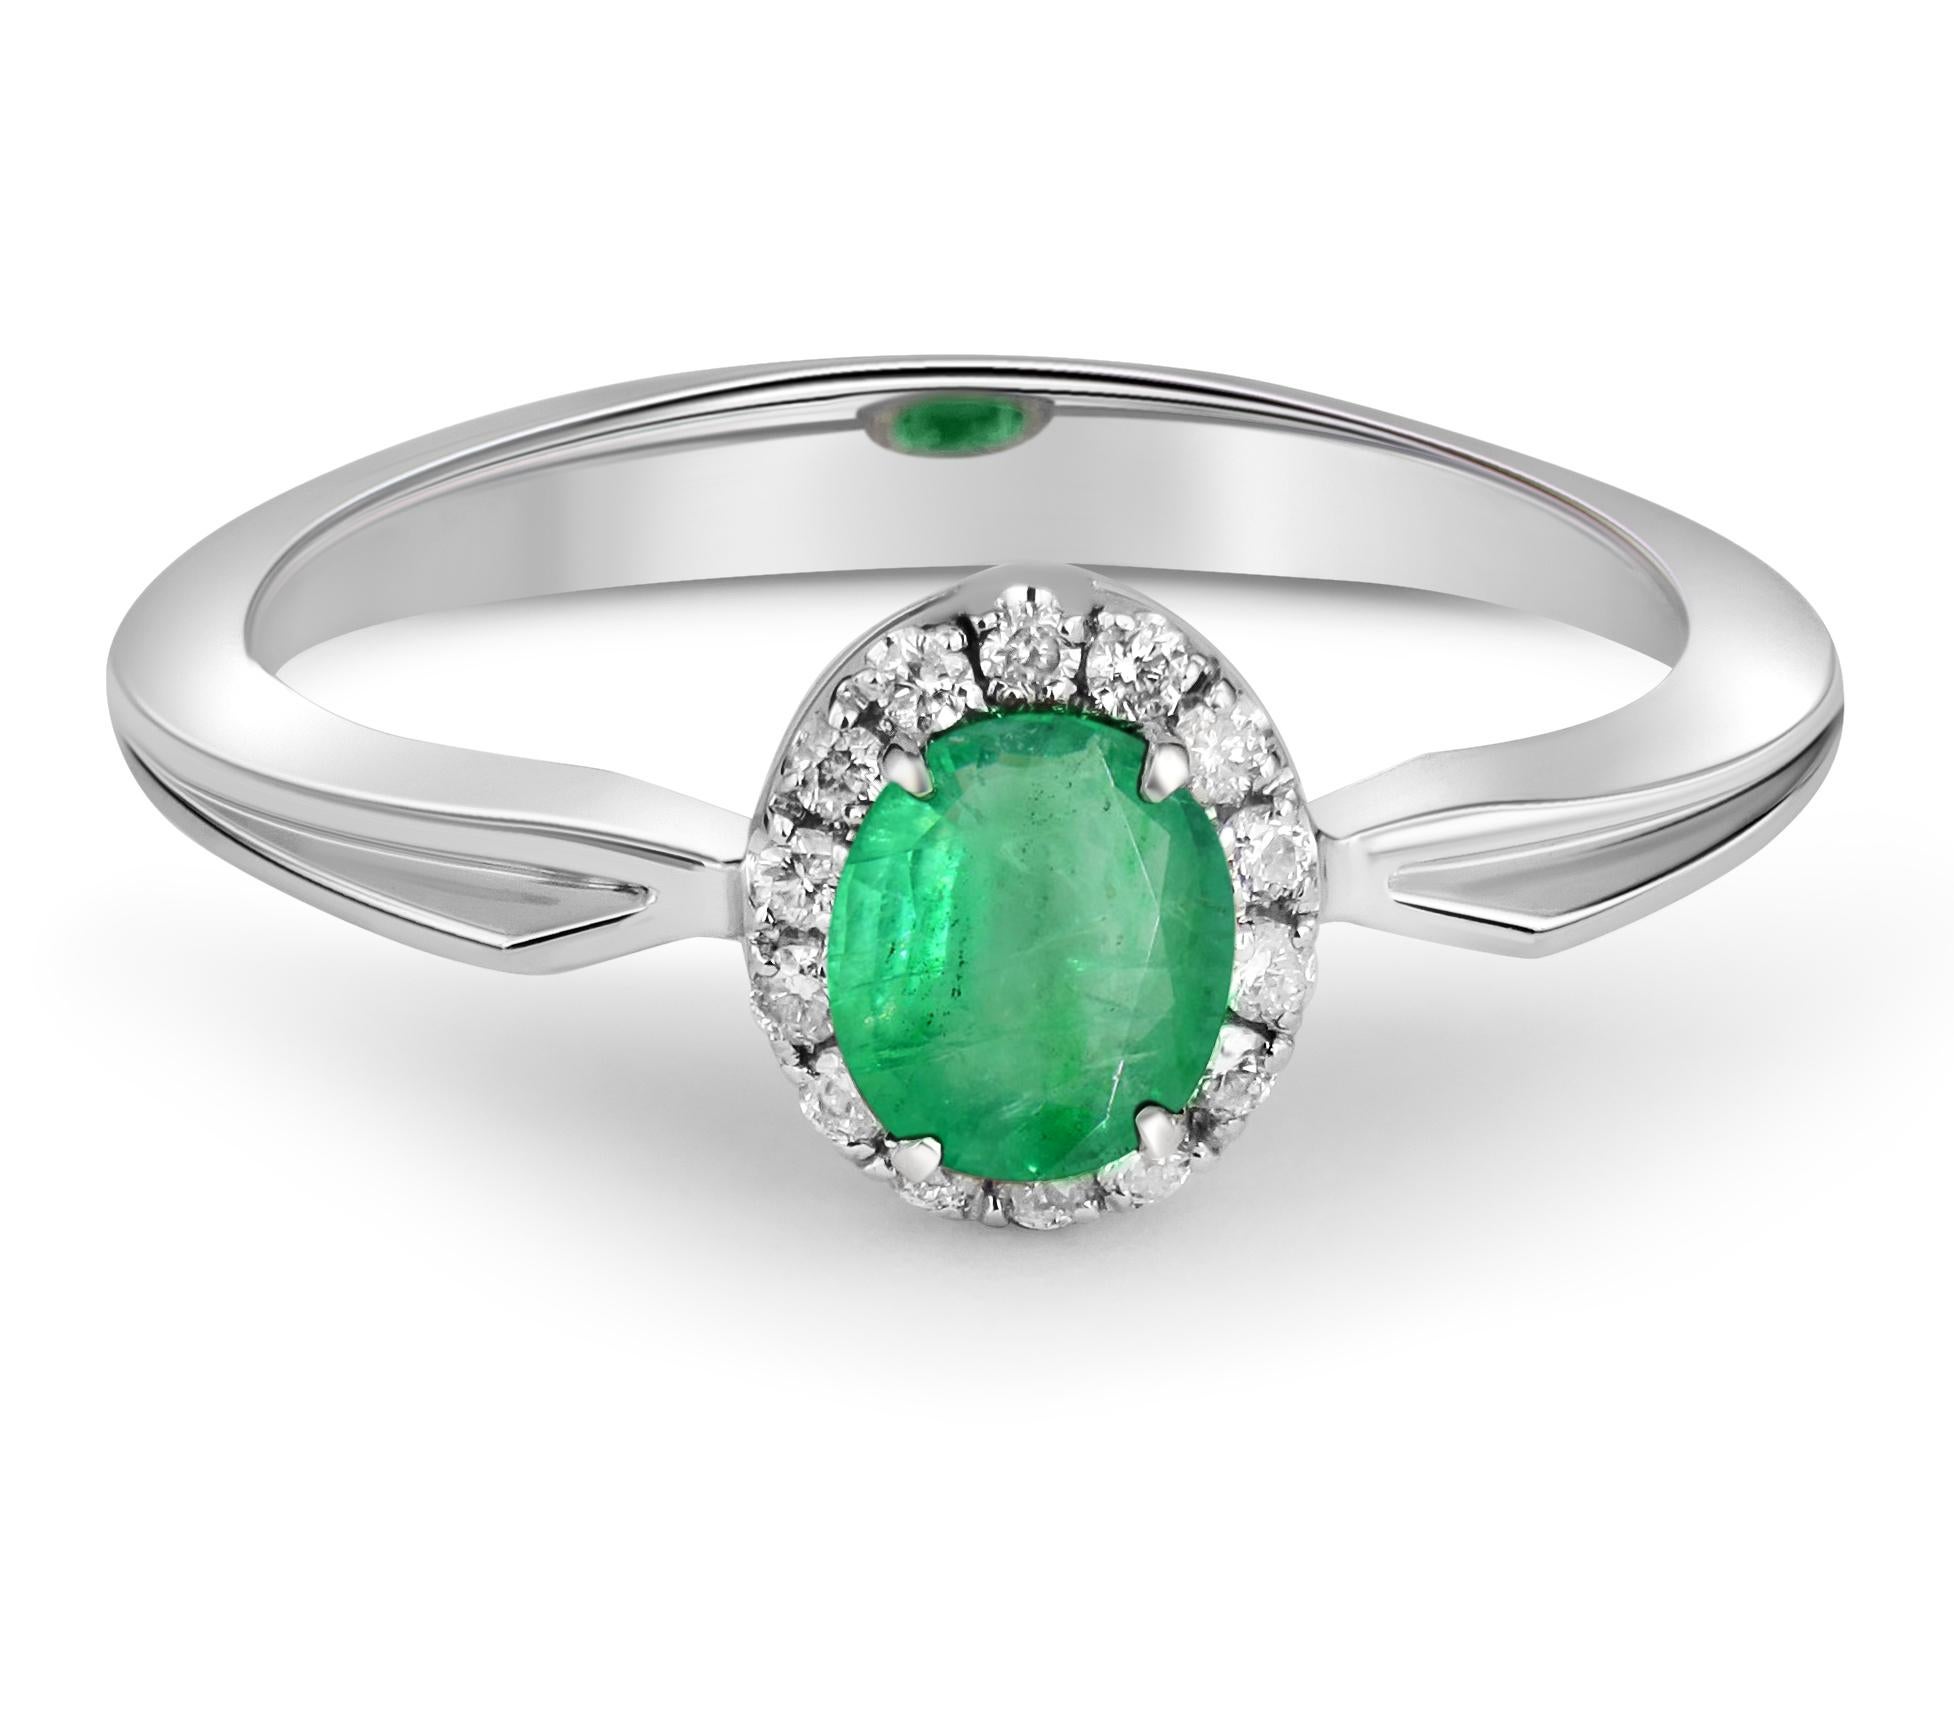 Emerald and diamonds 14k gold ring. 
Emerald engagement ring. Oval emerald ring. Emerald gold ring. Emerald vintage ring.

Metal type: gold
Metal stamp: 14k Gold
Weight: 2 g. depends from size.

Central gemstone:
Emerald: oval shape, green color, Si